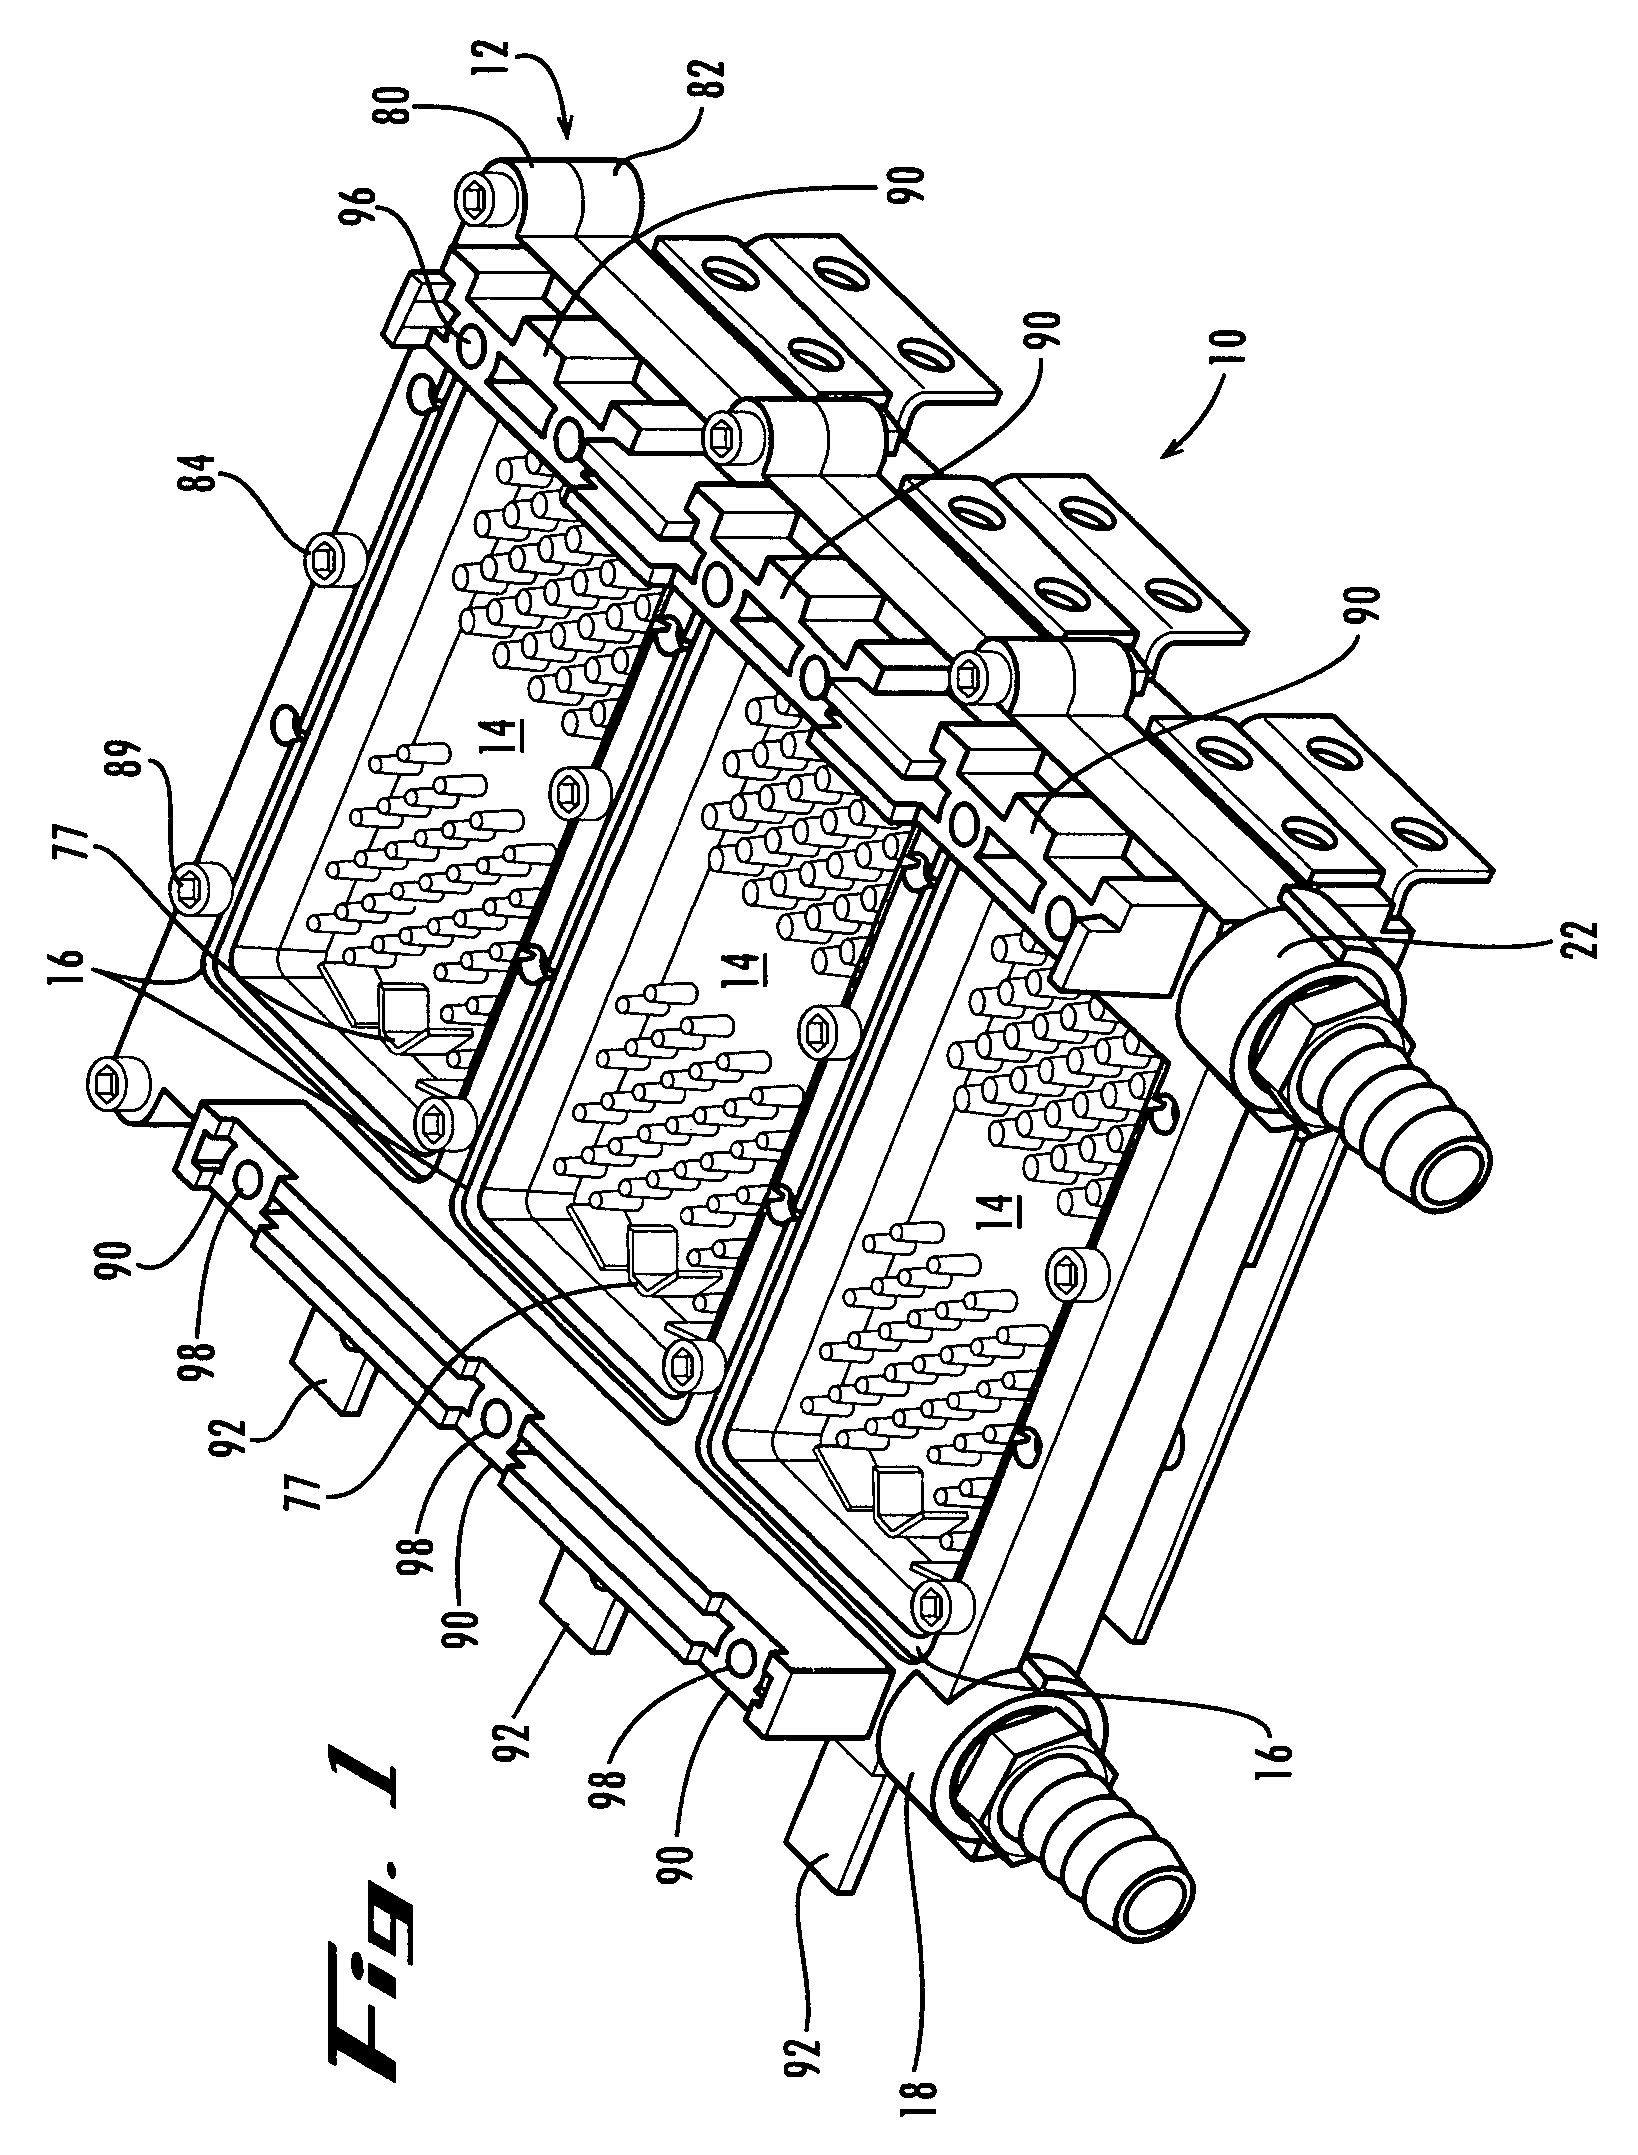 Fluid cooled electrical assembly